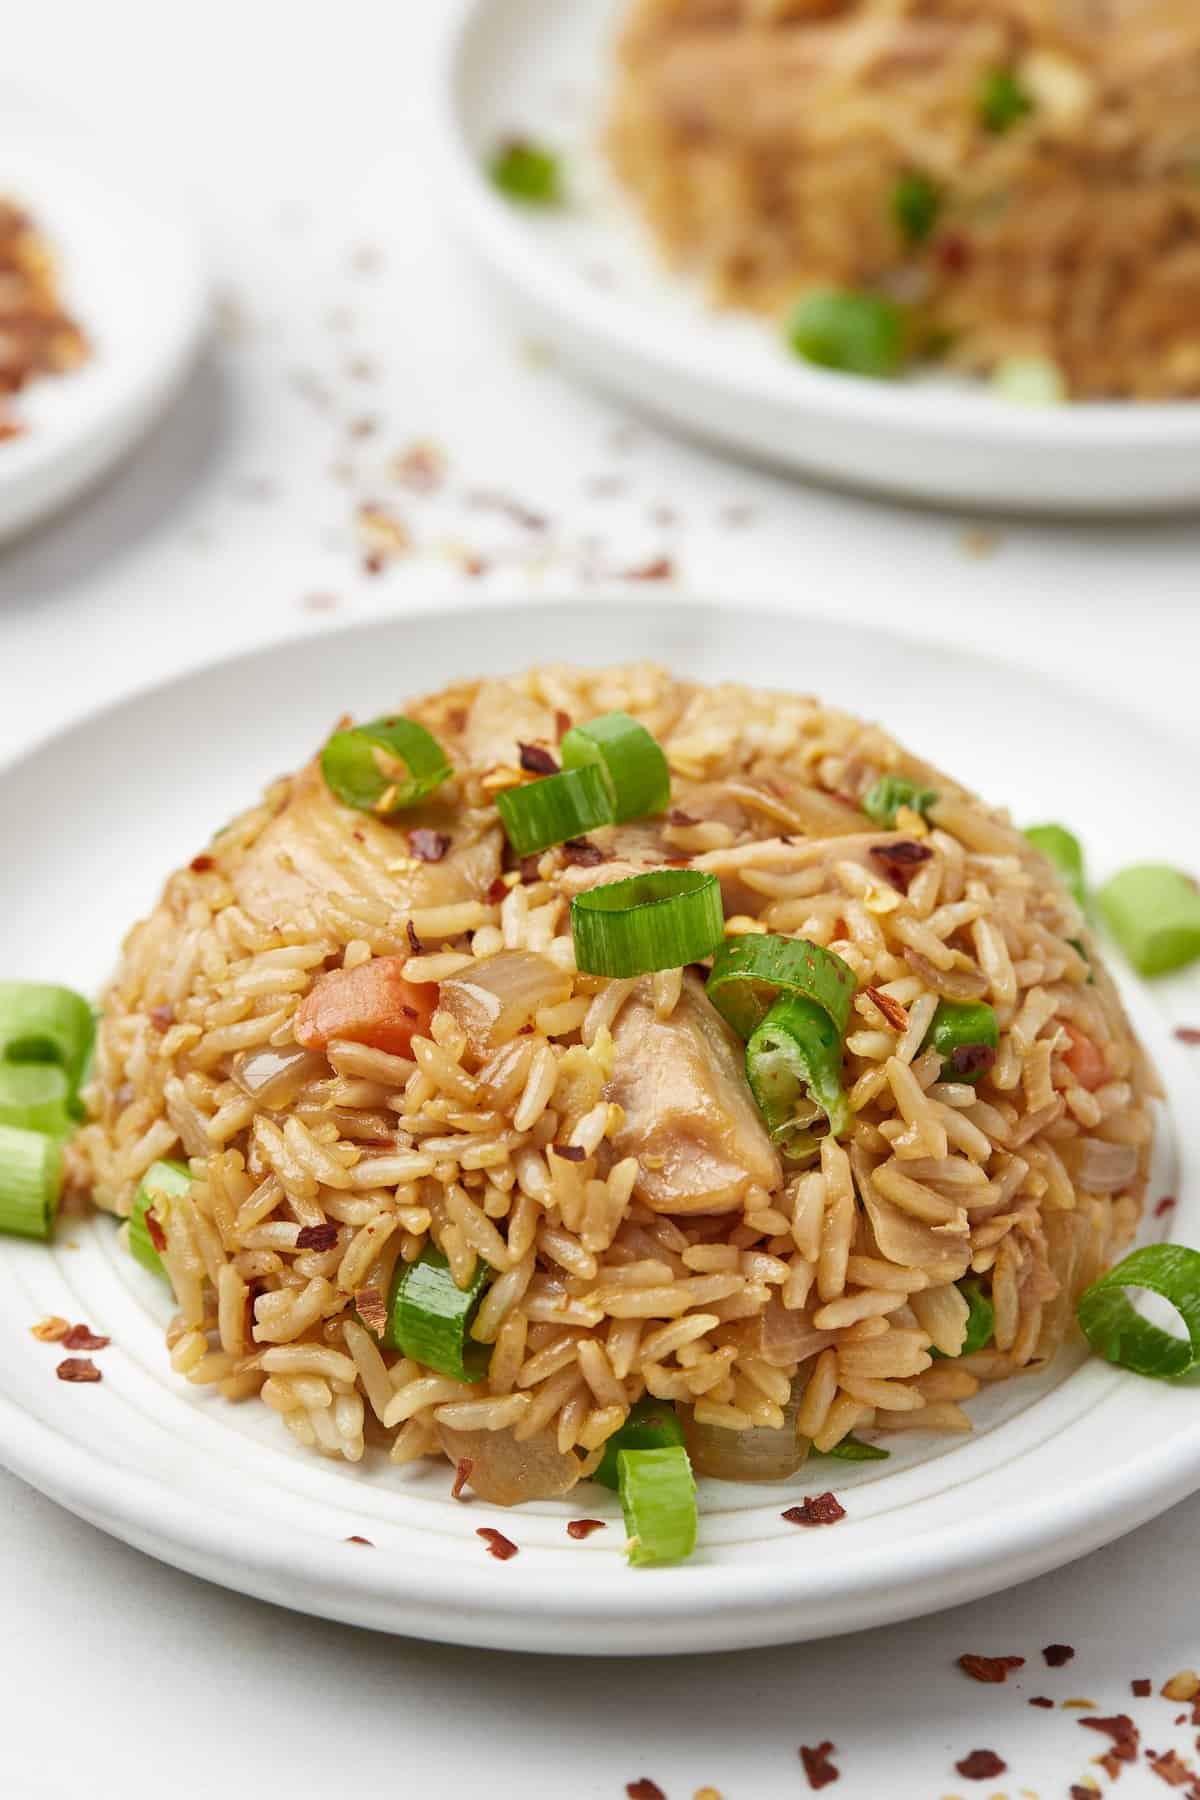 A pile of chicken fried rice on a small plate with chopped green onions on top as a garnish.